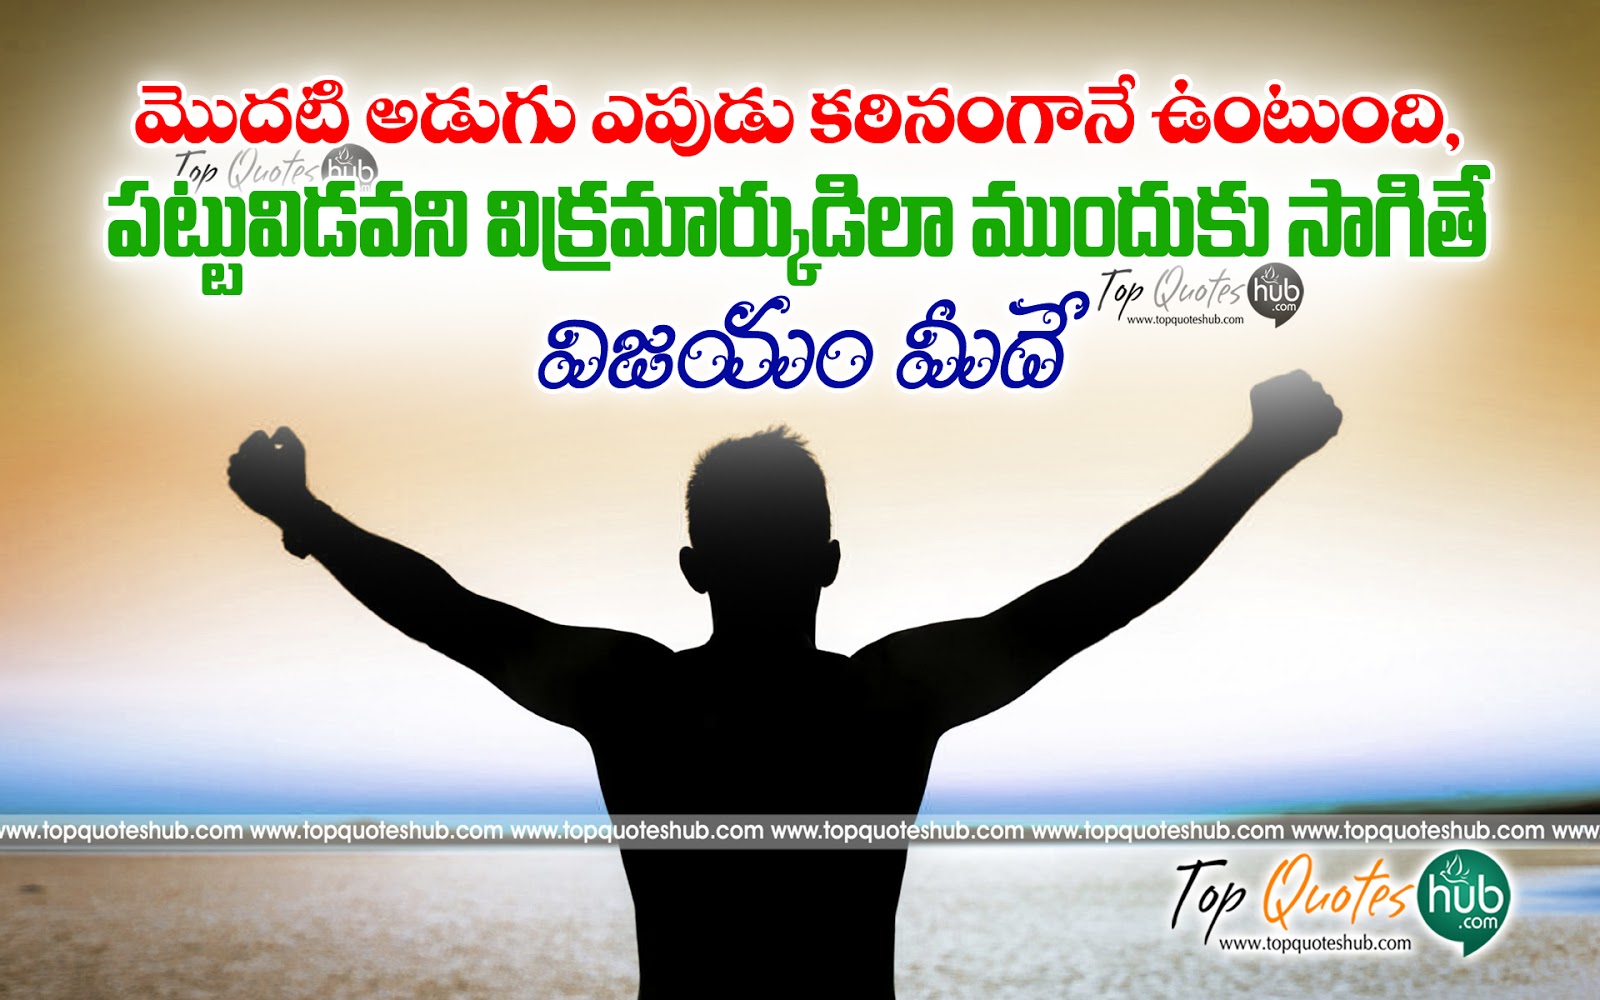 Telugu Success Greetings And Wishes Quotes Hd Images Topquoteshub